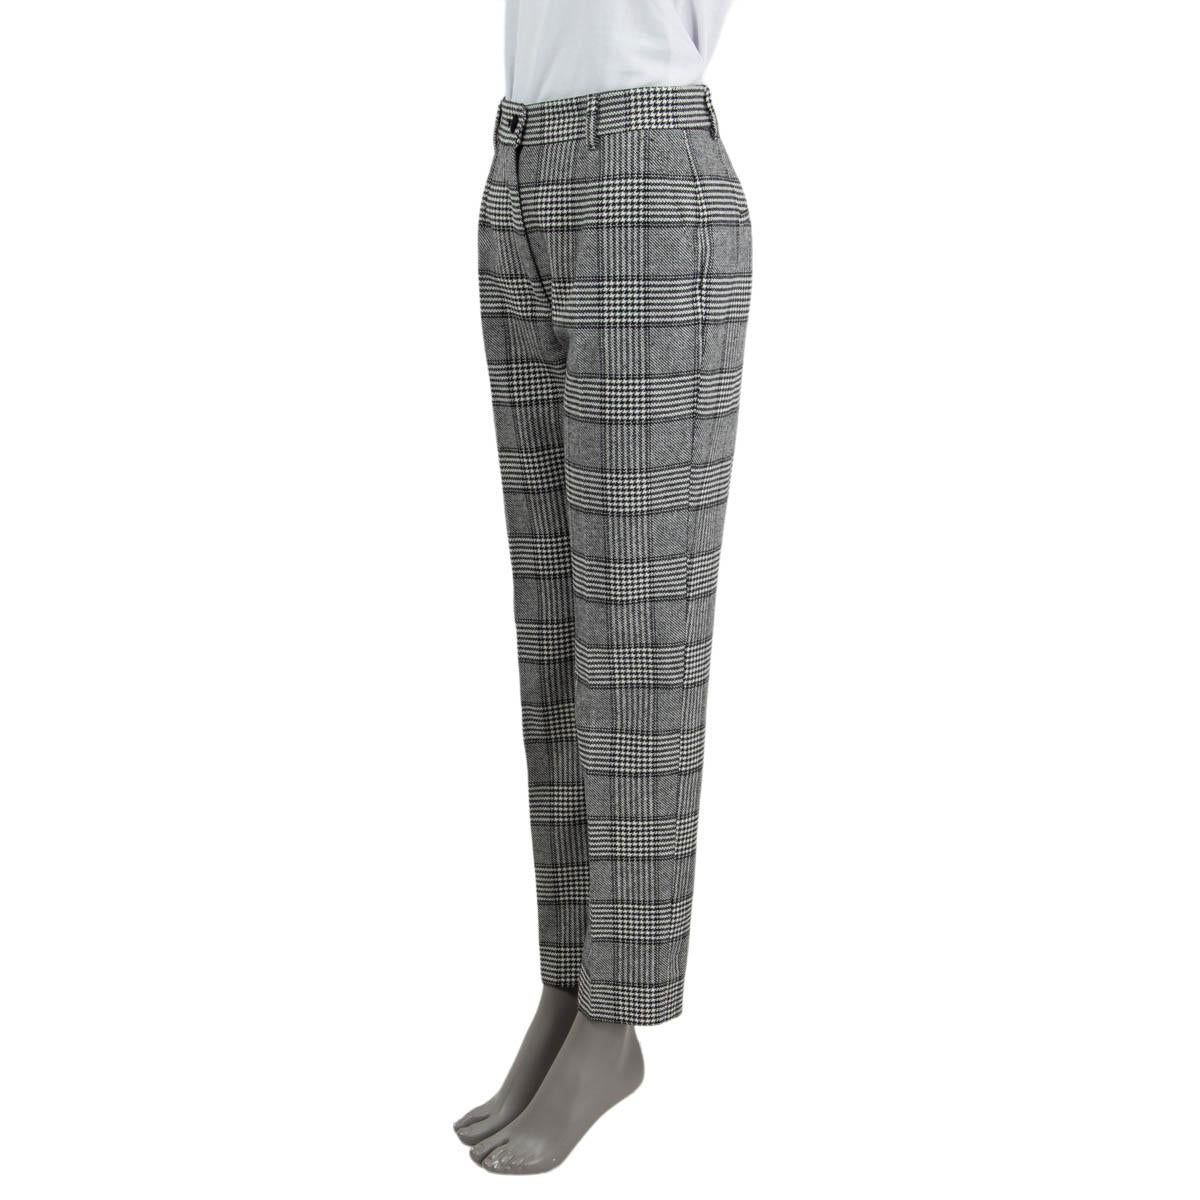 100% authentic Dolce & Gabbana houndstooth copped cigarette pants in black and white wool (35%), polyester (33%), acrylic (28%), other fibres (3%) and elastane (1%). Feature two side slit pockets and belt loops. Open with a button and a zipper on